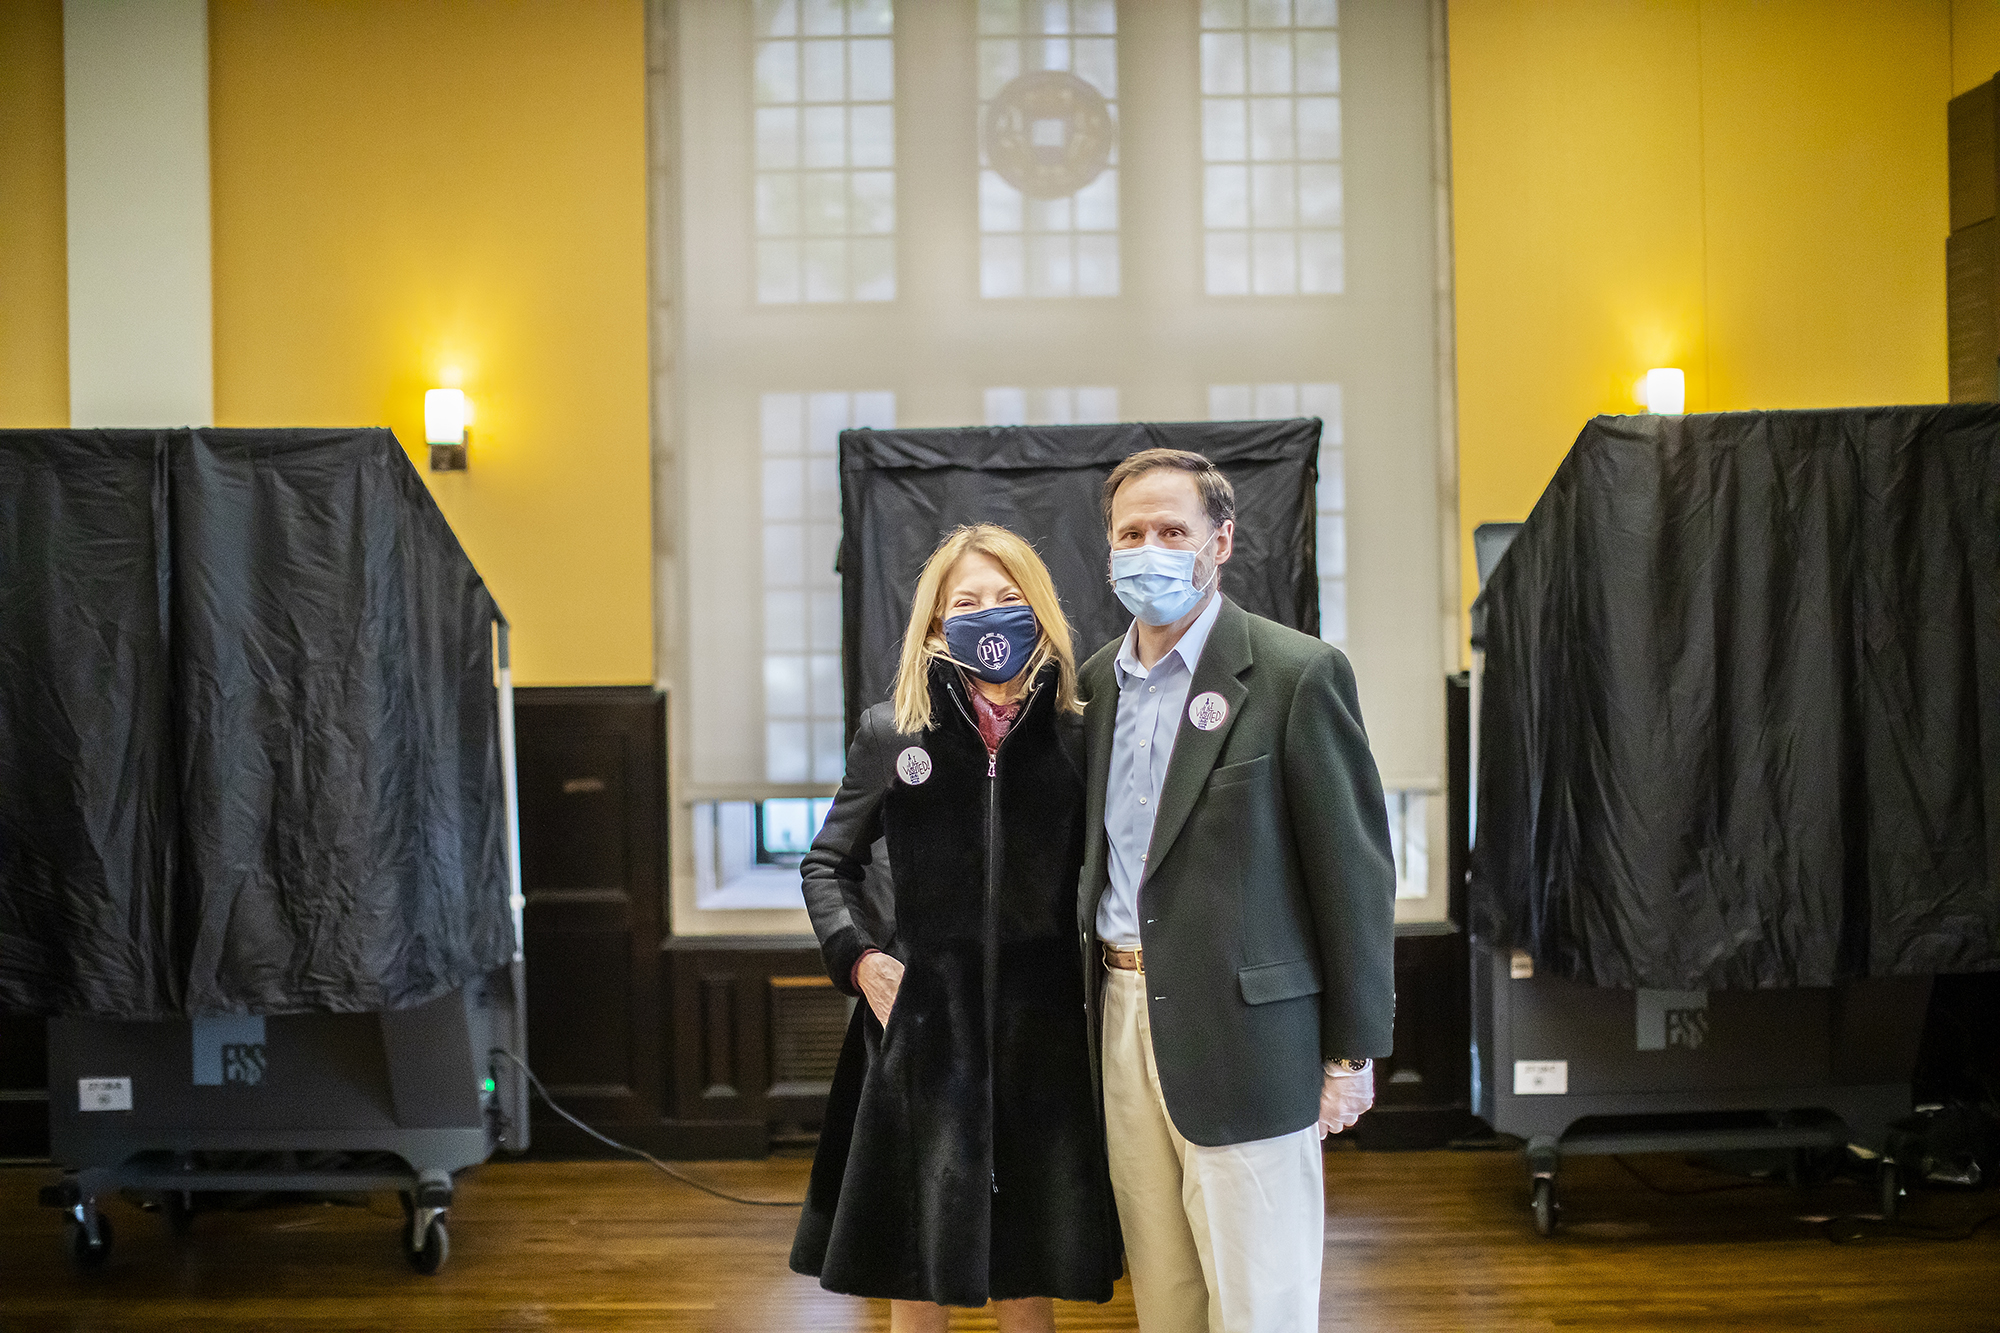 Gutmann and Doyle, both wearing face masks, pose for a photo inside Houston Hall polling place